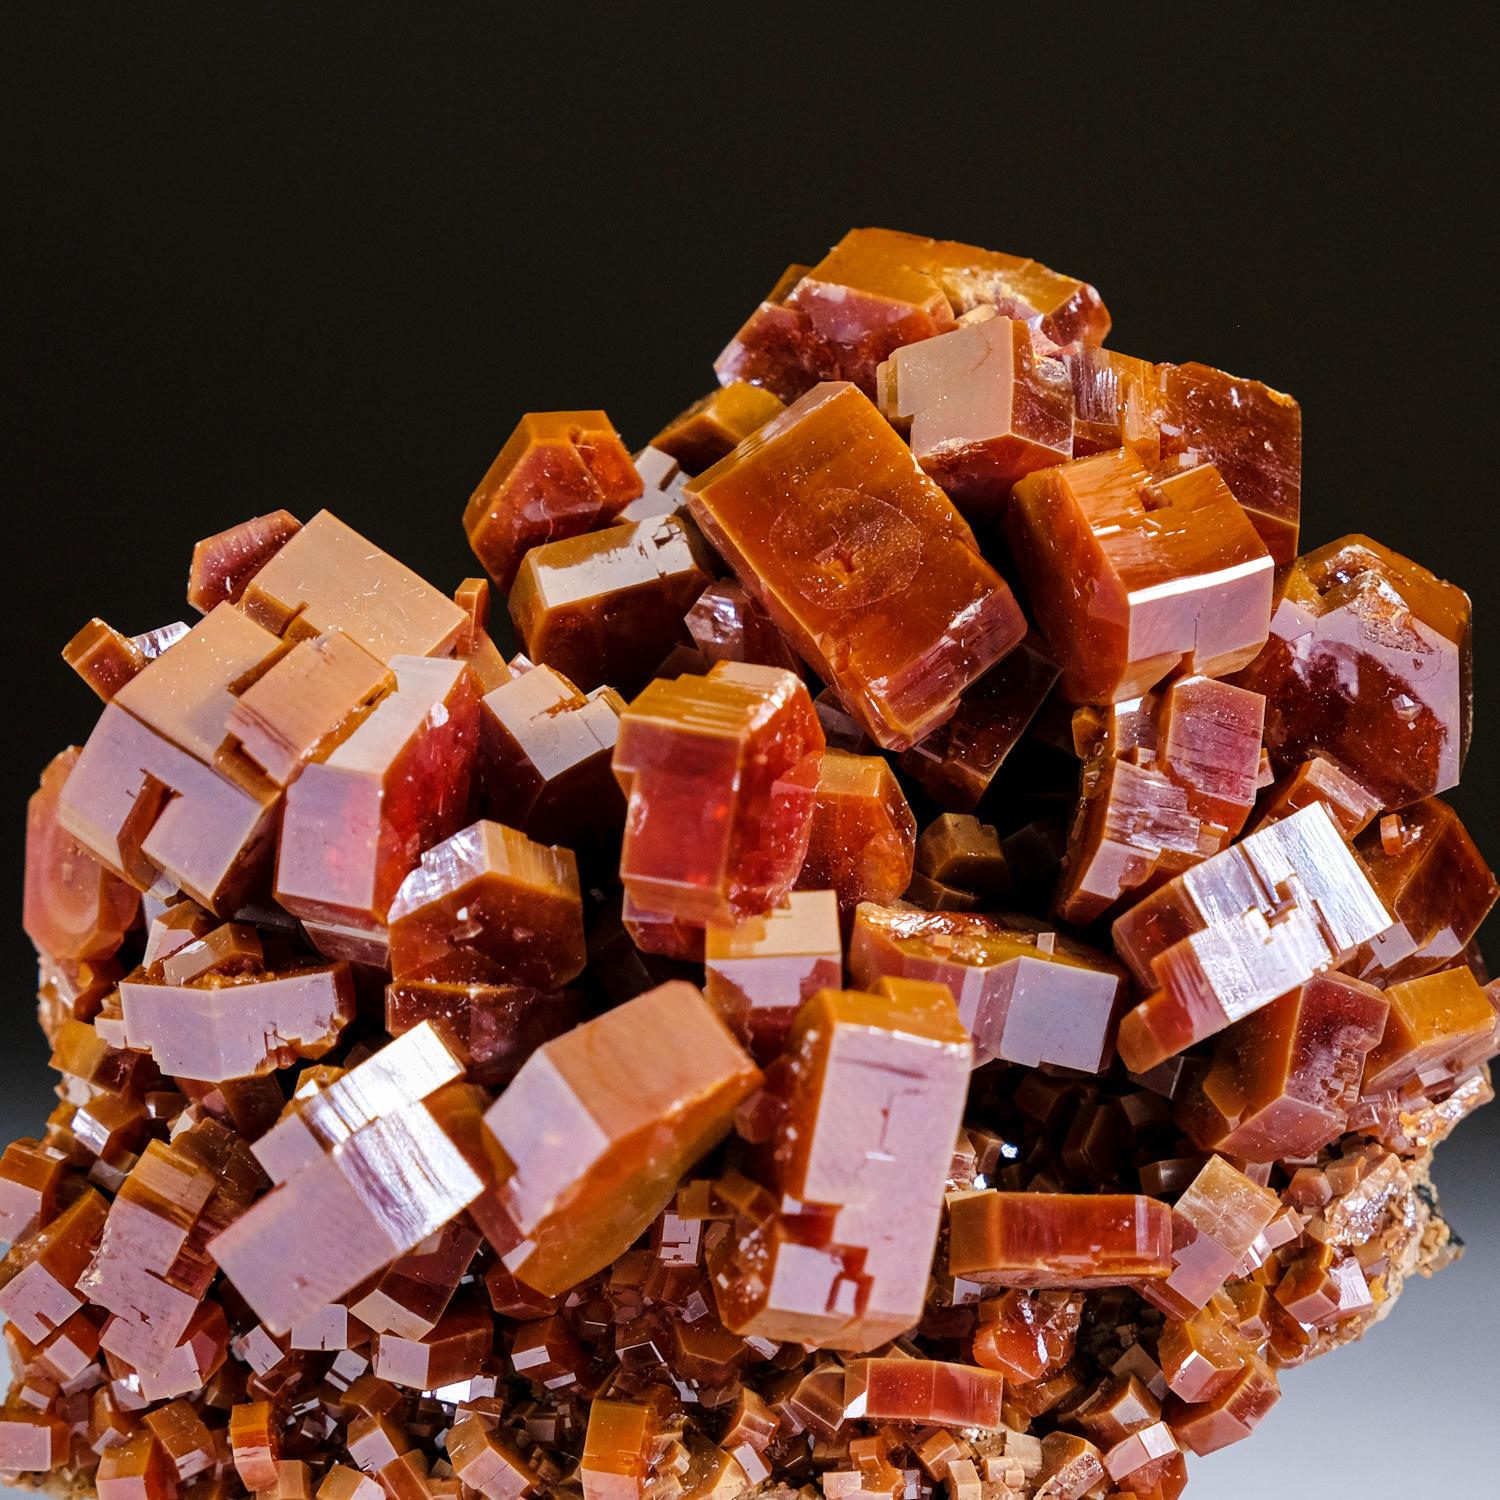 Contemporary Genuine Vanadinite Crystal Cluster on Matrix from Morocco (148.1 grams) For Sale